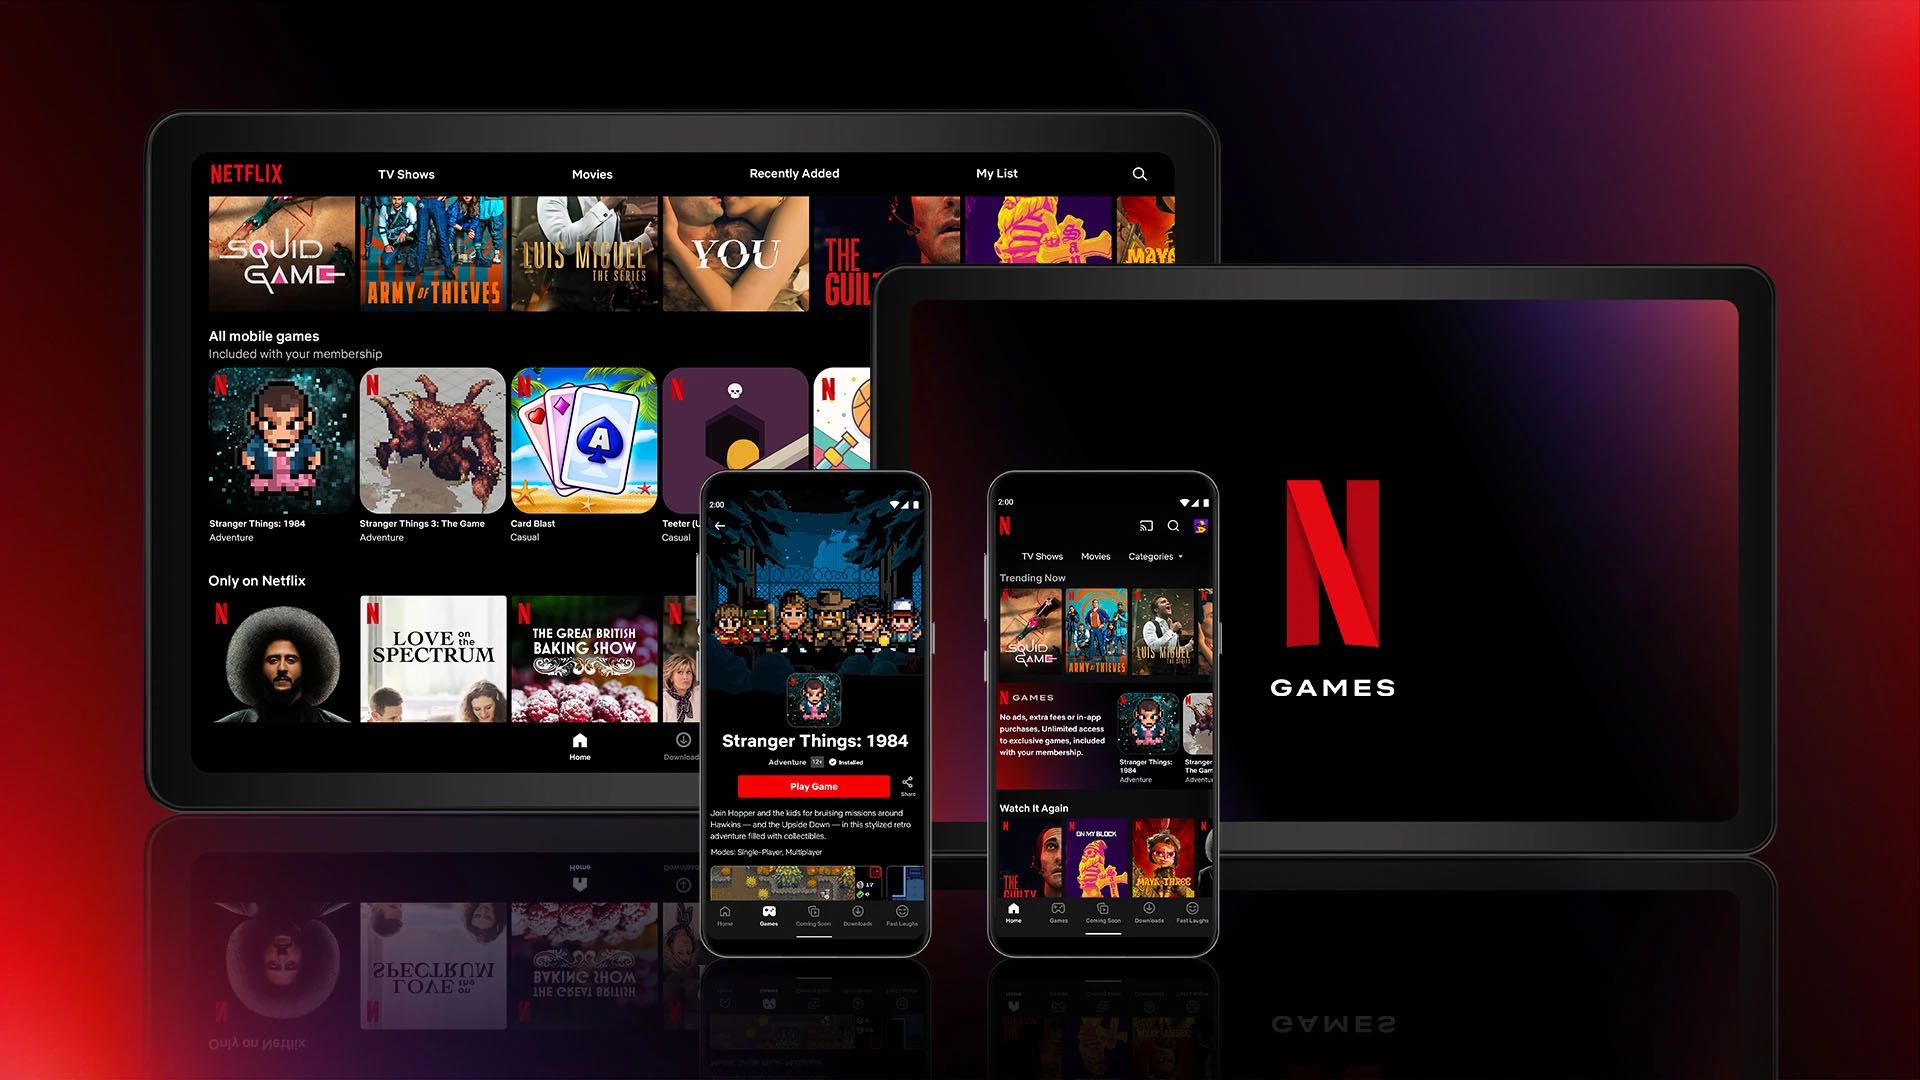 Bloomberg: Netflix games will be available to iOS users on App Store, but there's a nuance